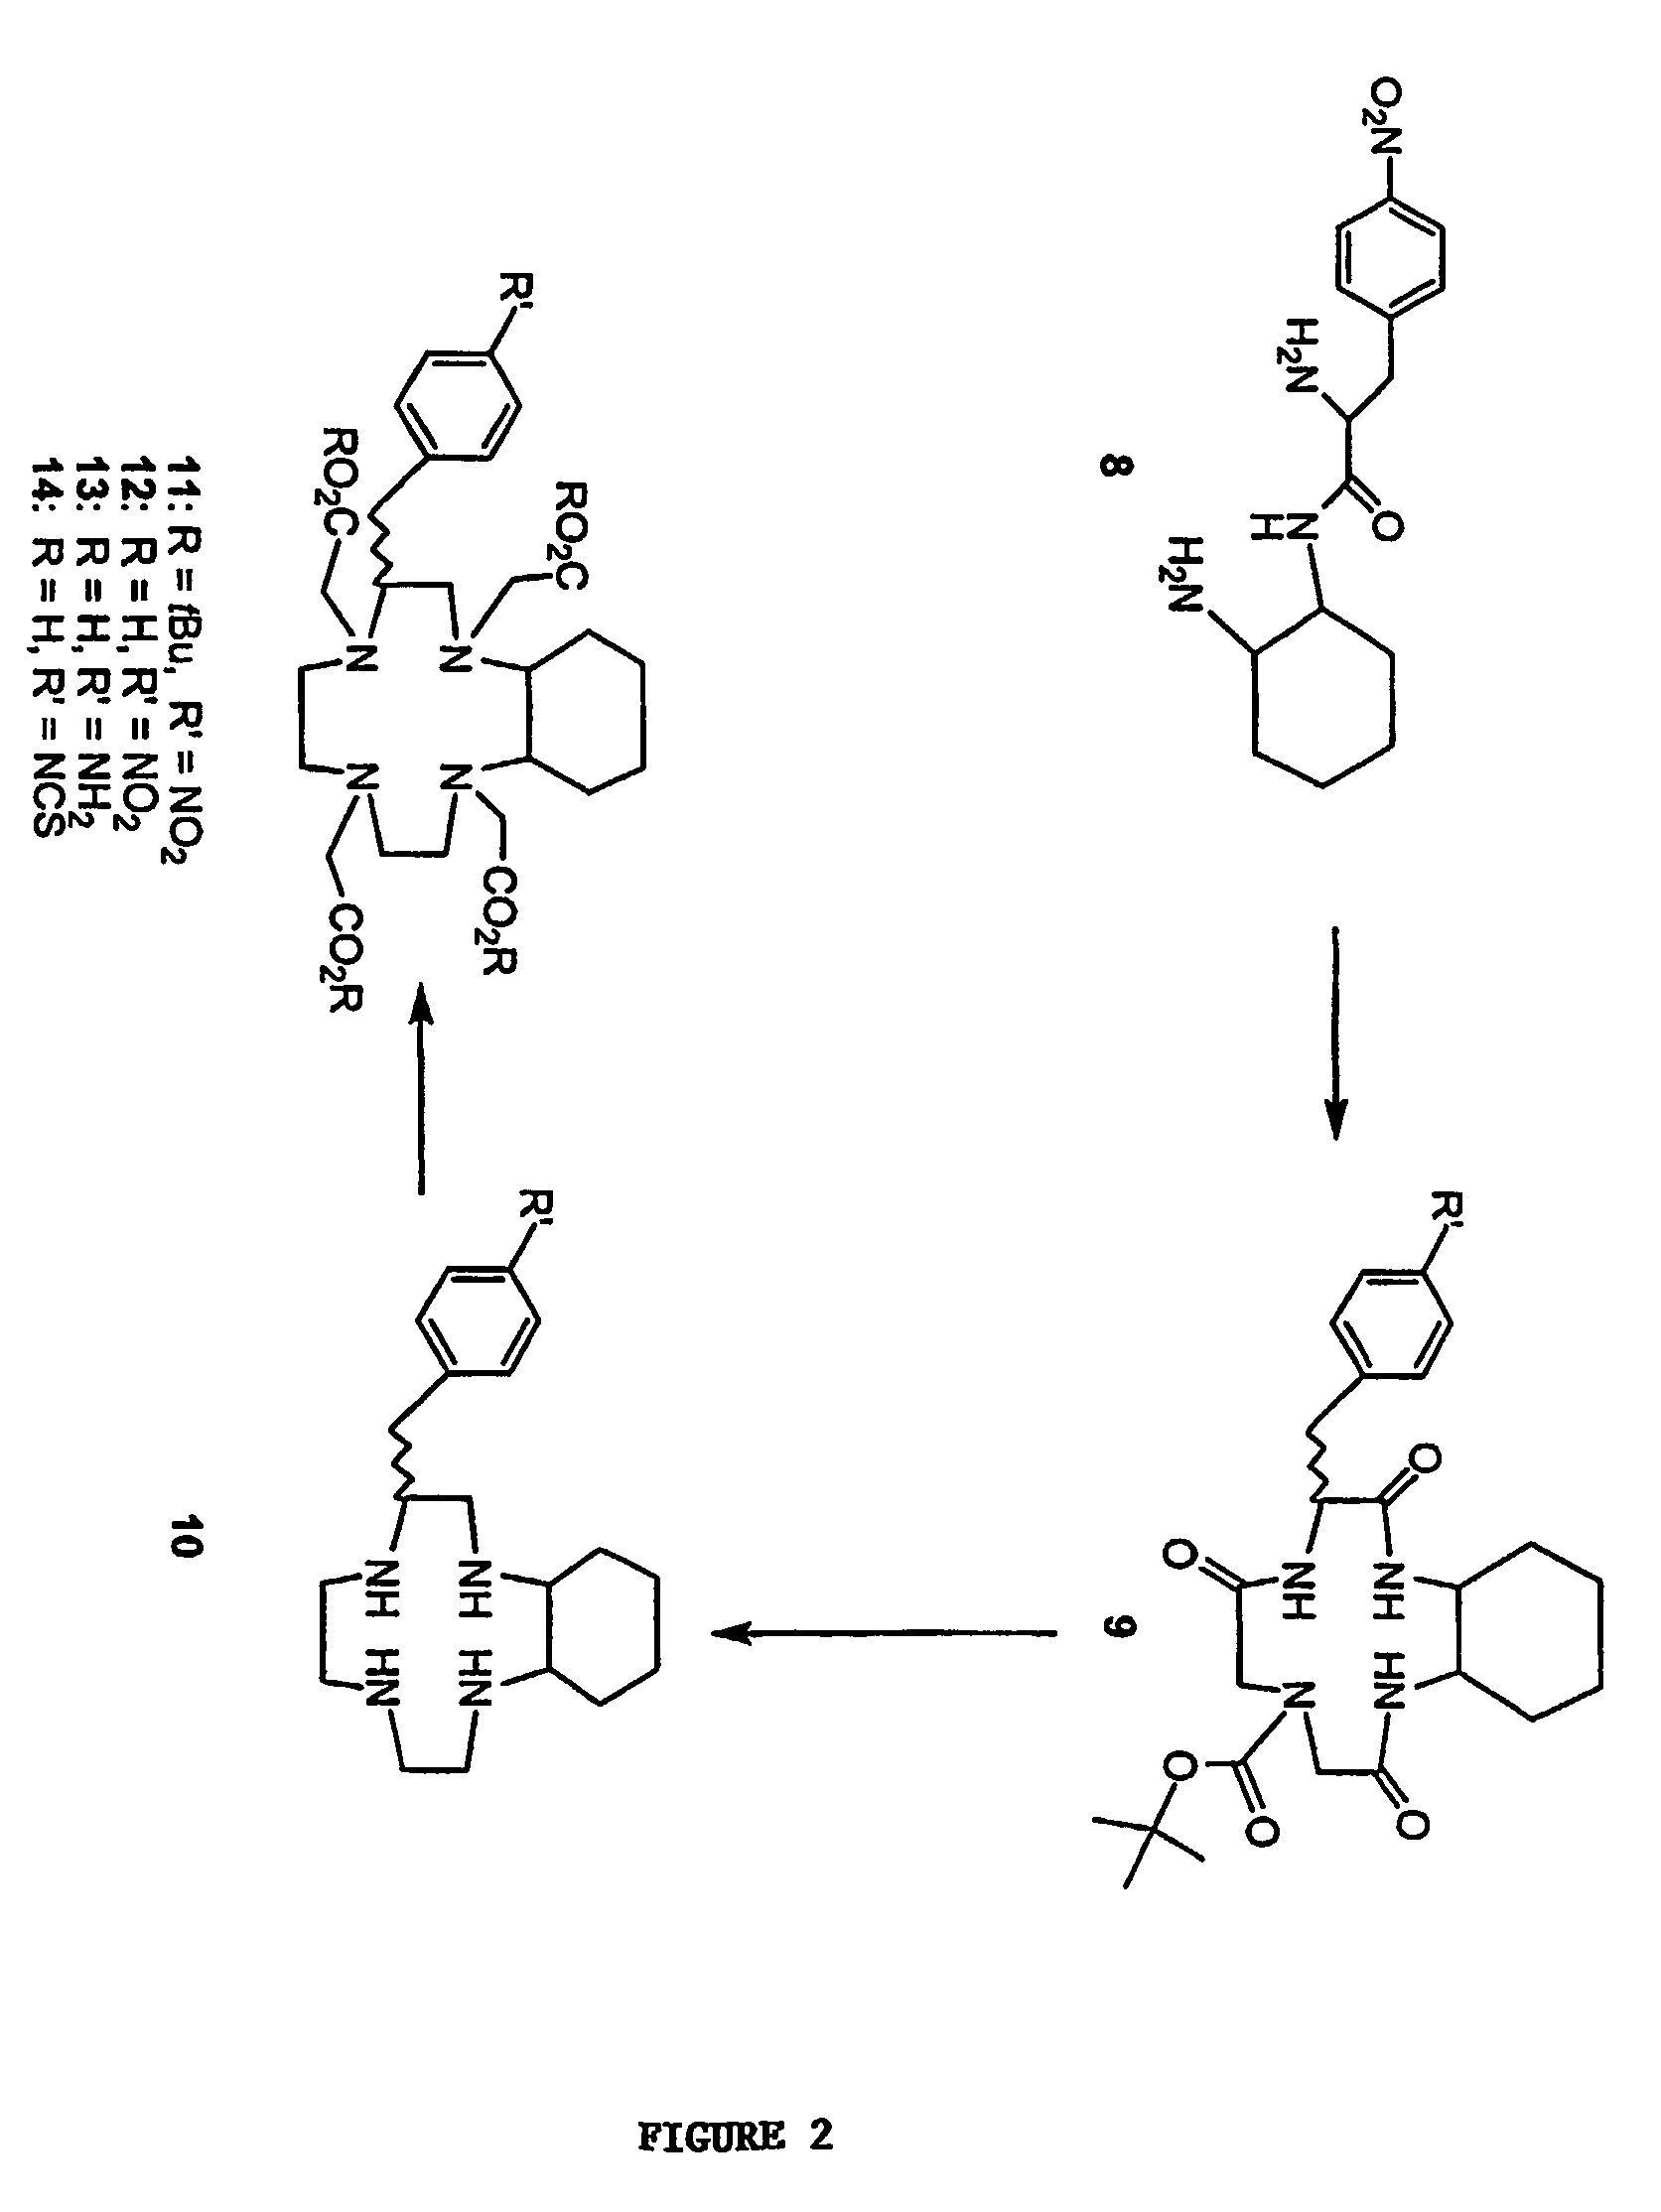 Backbone-substituted bifunctional DOTA ligands, complexes and compositions thereof, and methods of using same